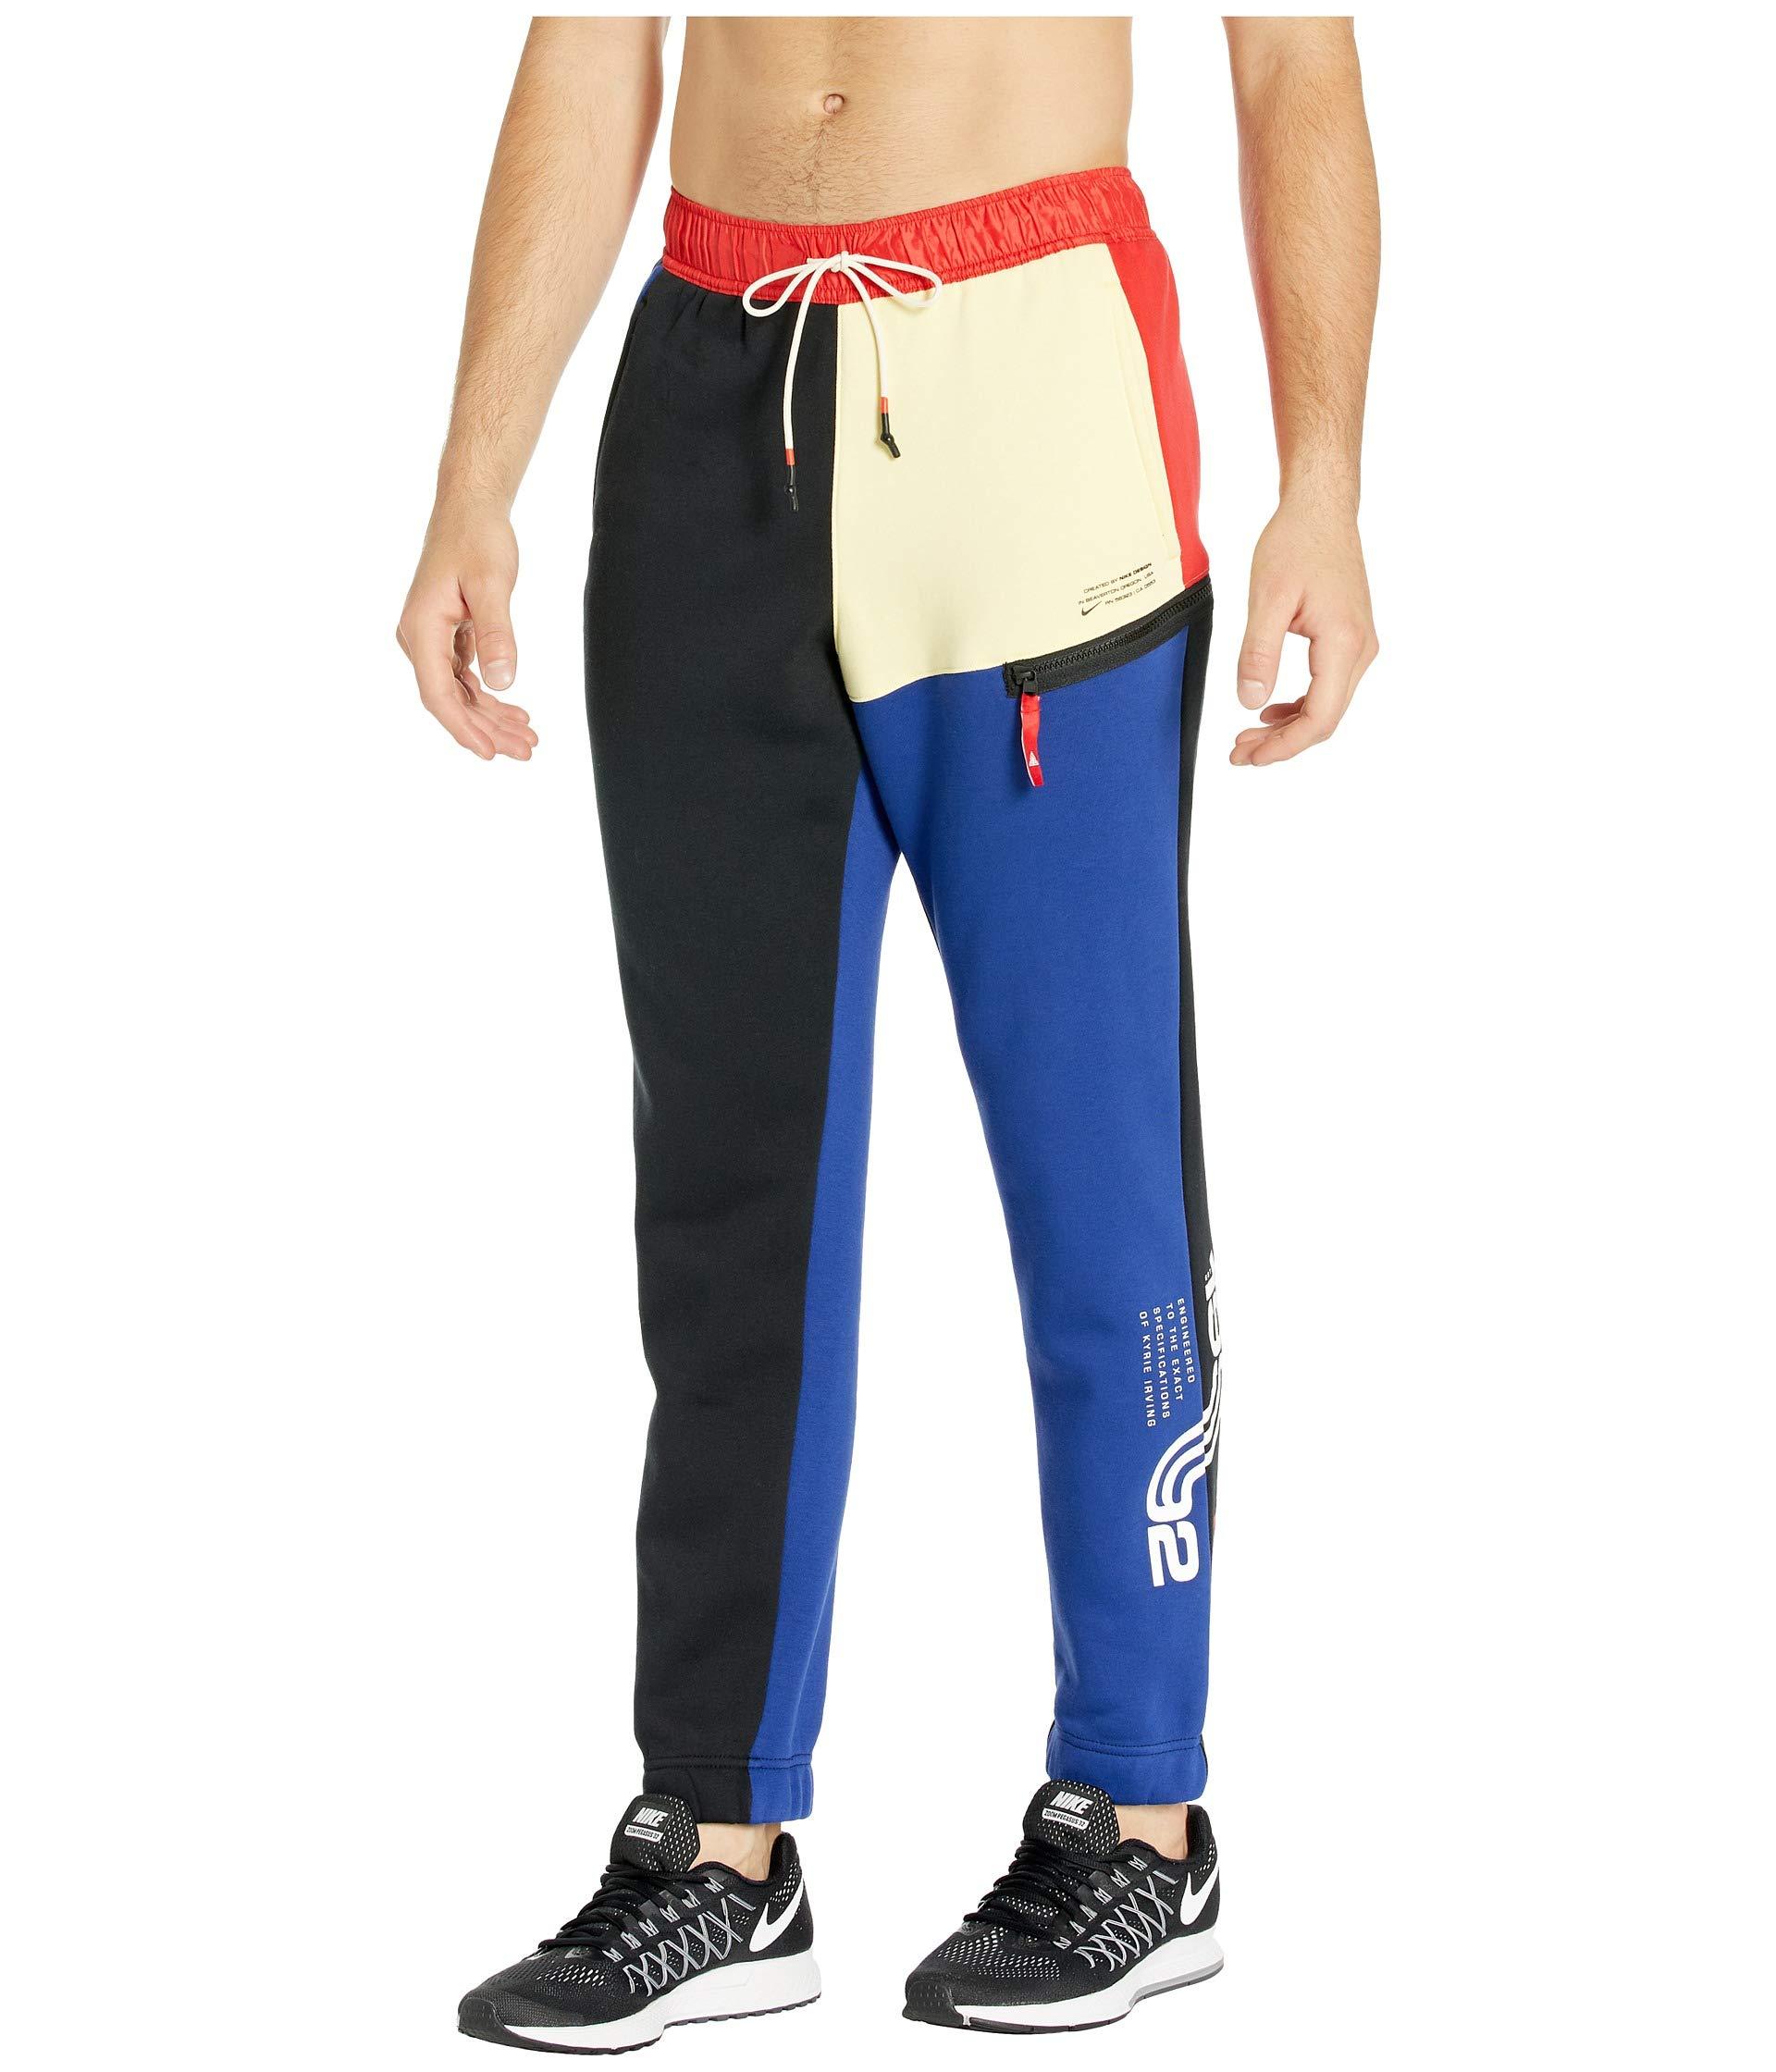 kyrie irving jogging pants